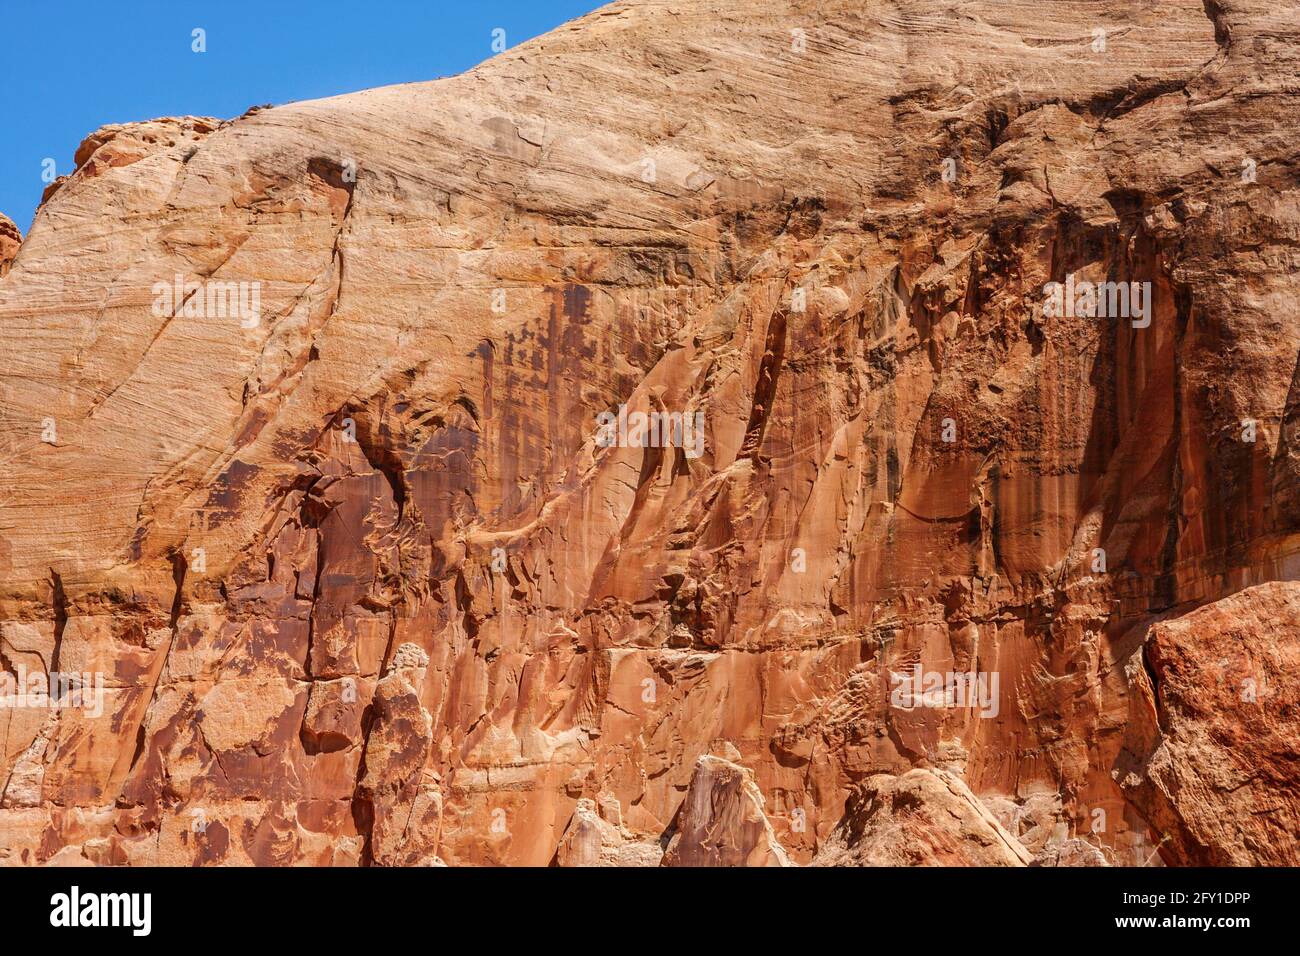 Bizarre textures on the rocks of Capitol Reef National Park, Utah, USA. Stock Photo